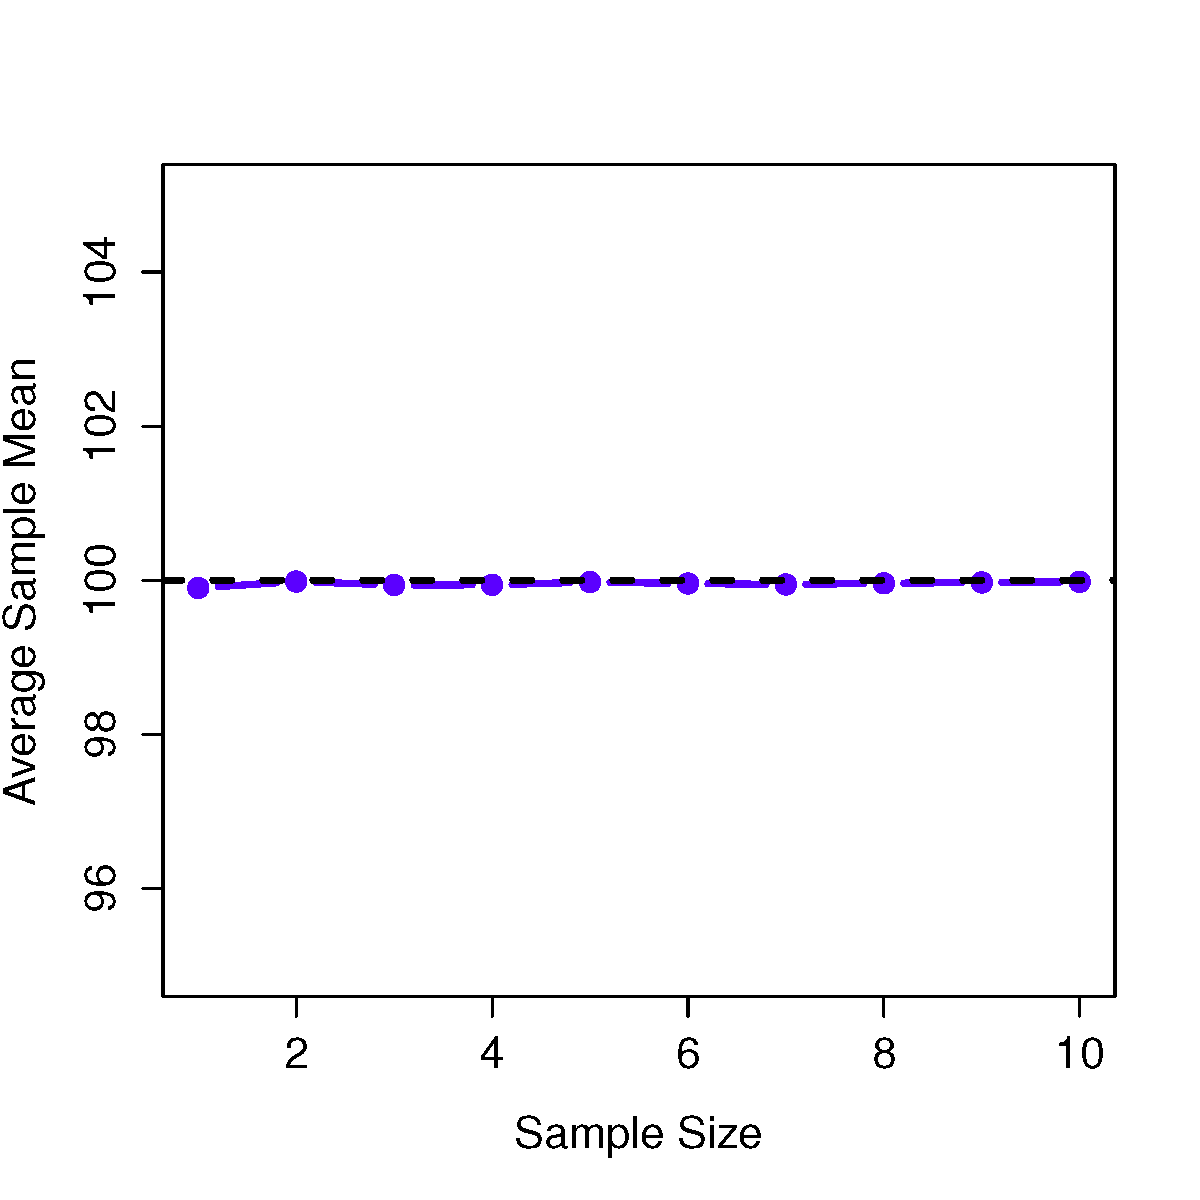 An illustration of the fact that the sample mean is an unbiased estimator of the population mean.